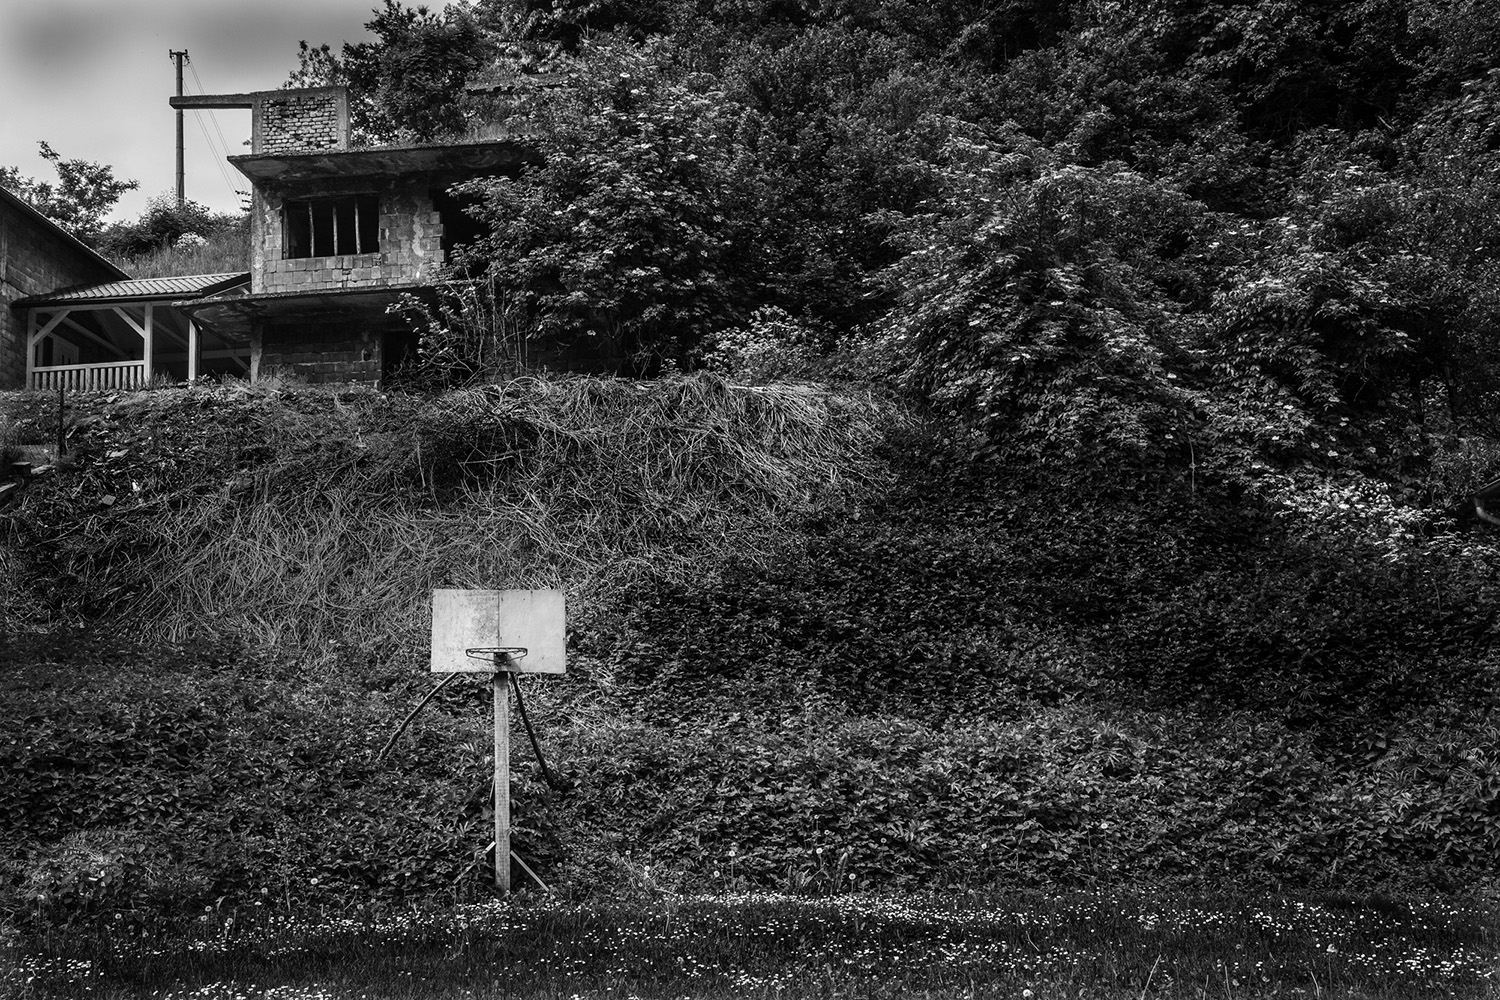 21. Basketball net and house remains